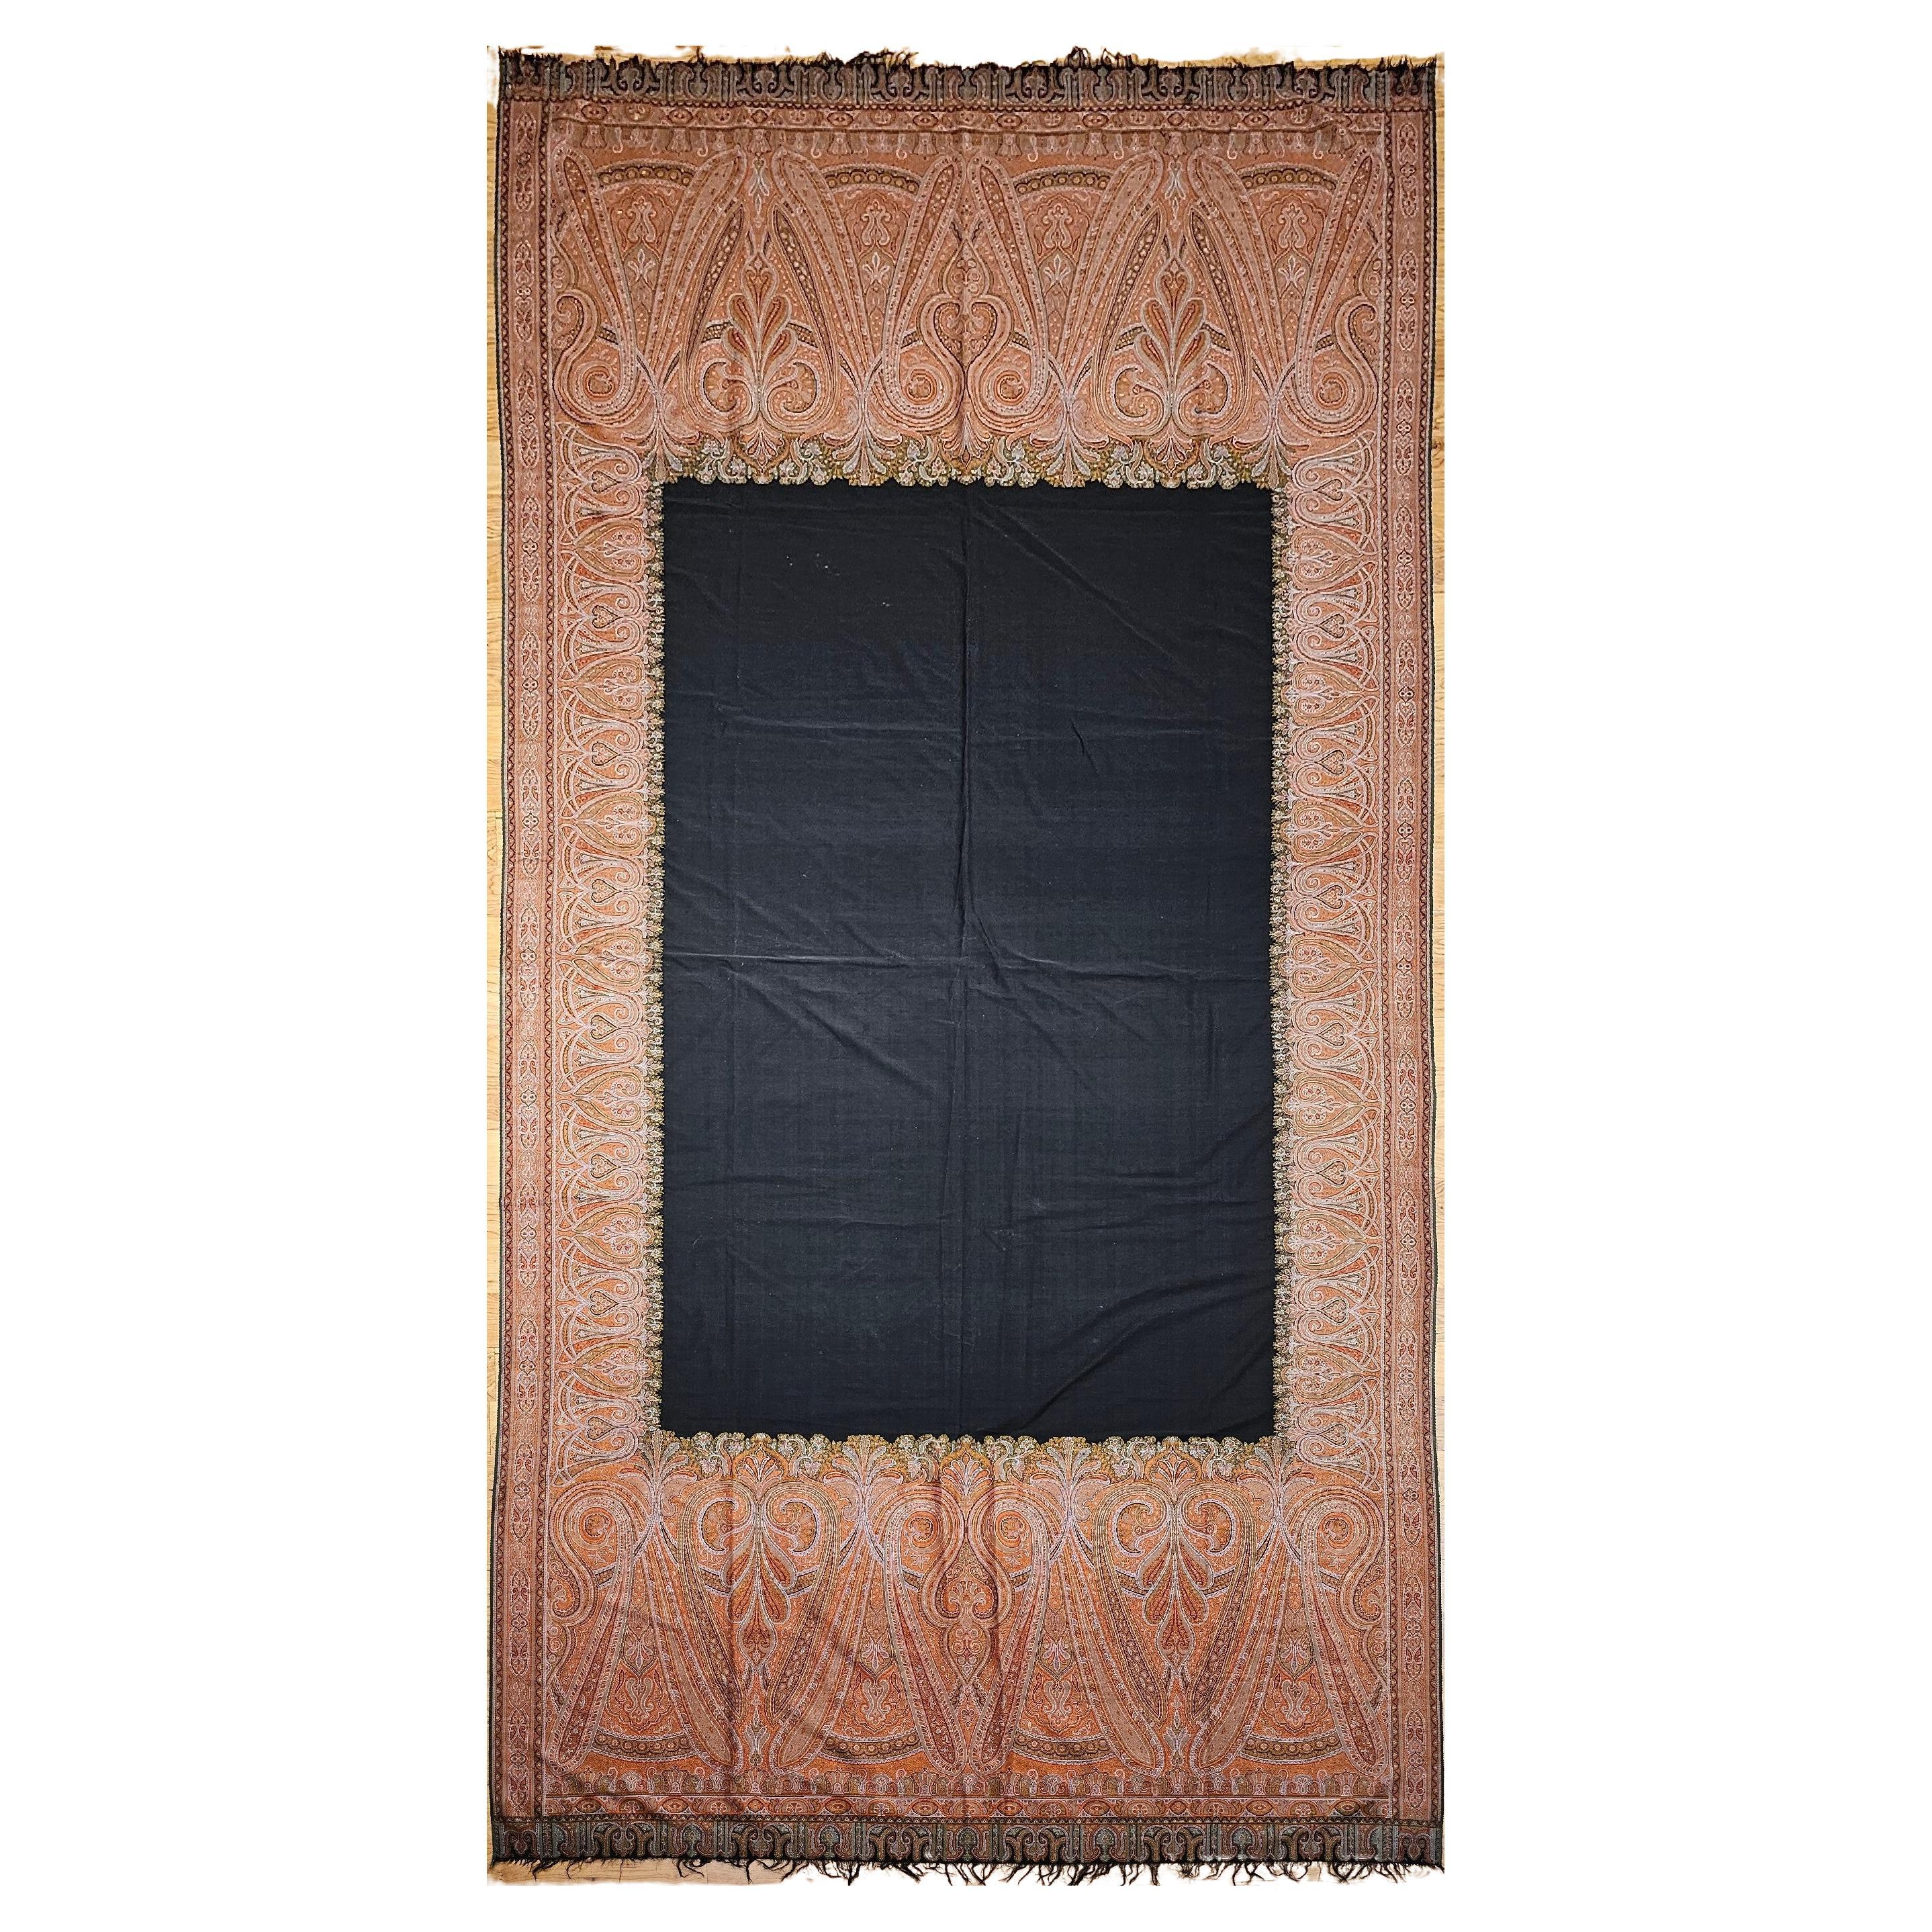 19th Century Hand-Woven Kashmiri Paisley Shawl in Brick Red, Black, Green For Sale